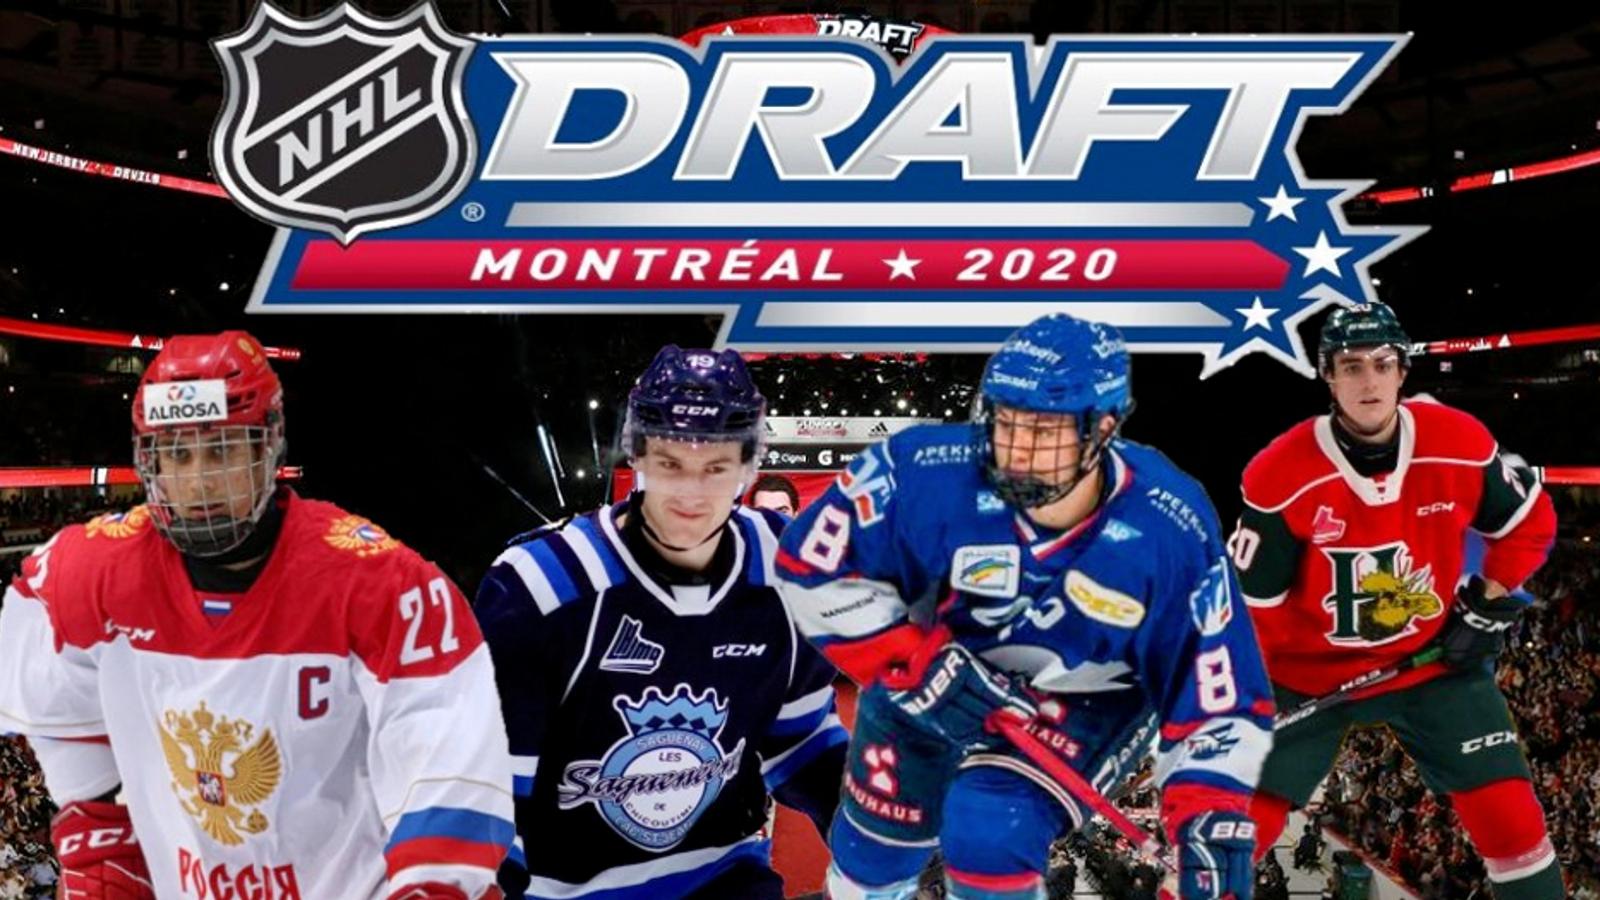 NHL Draft scheduled for June before the conclusion of the 2020 Stanley Cup Playoffs